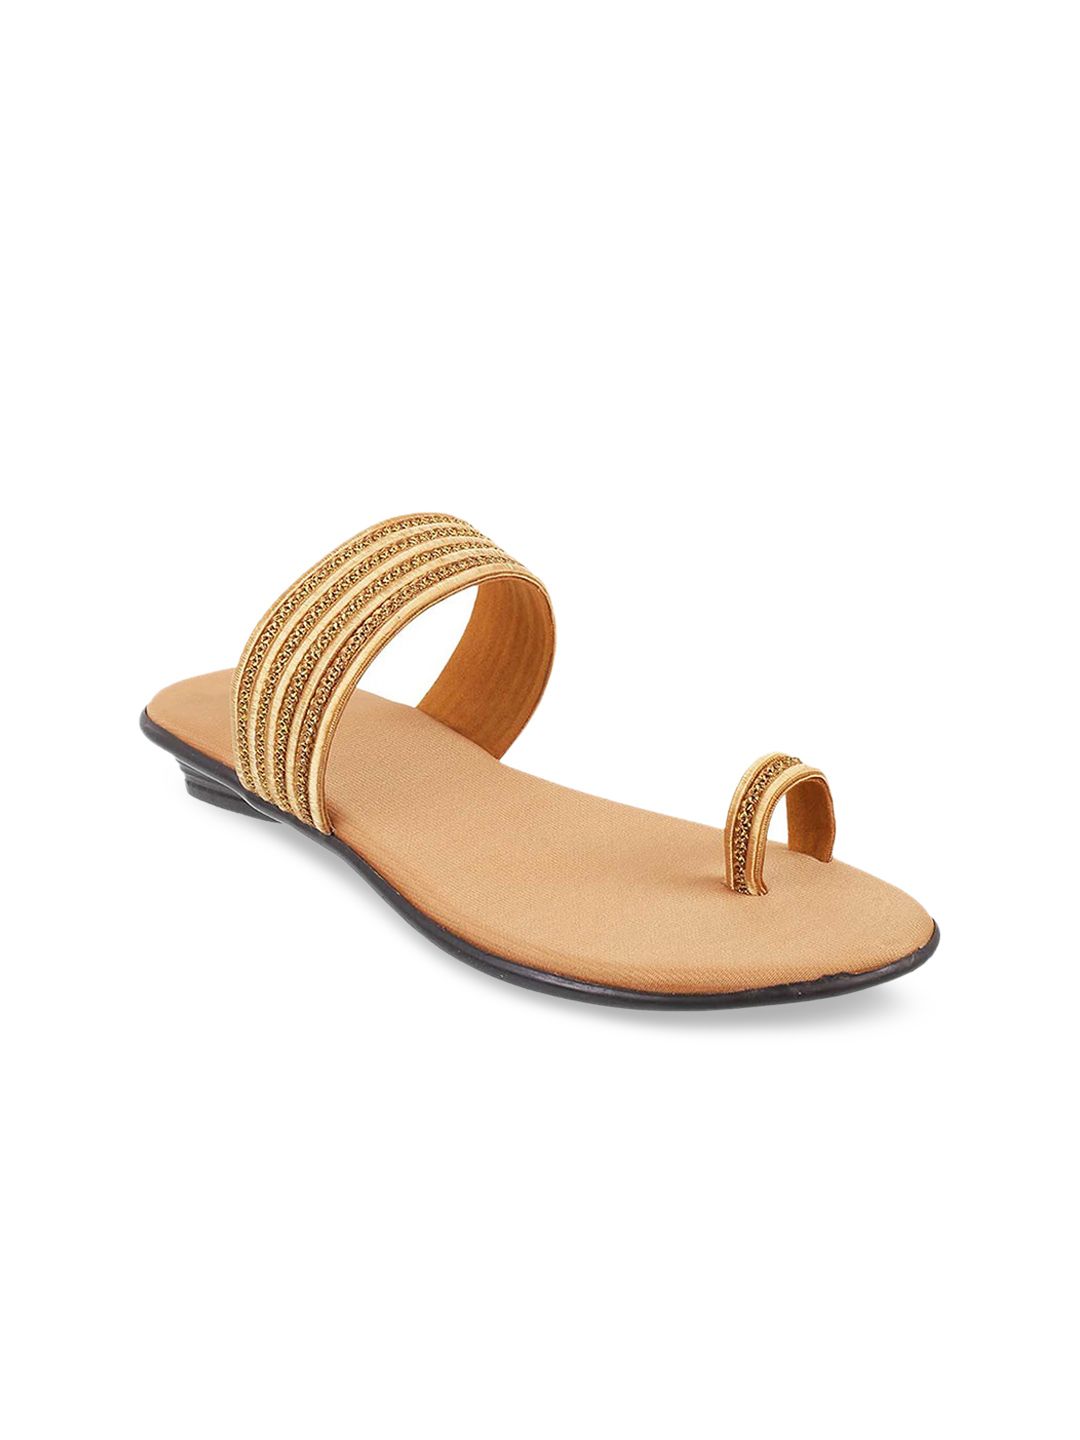 WALKWAY by Metro Gold-Toned Block Sandals Price in India